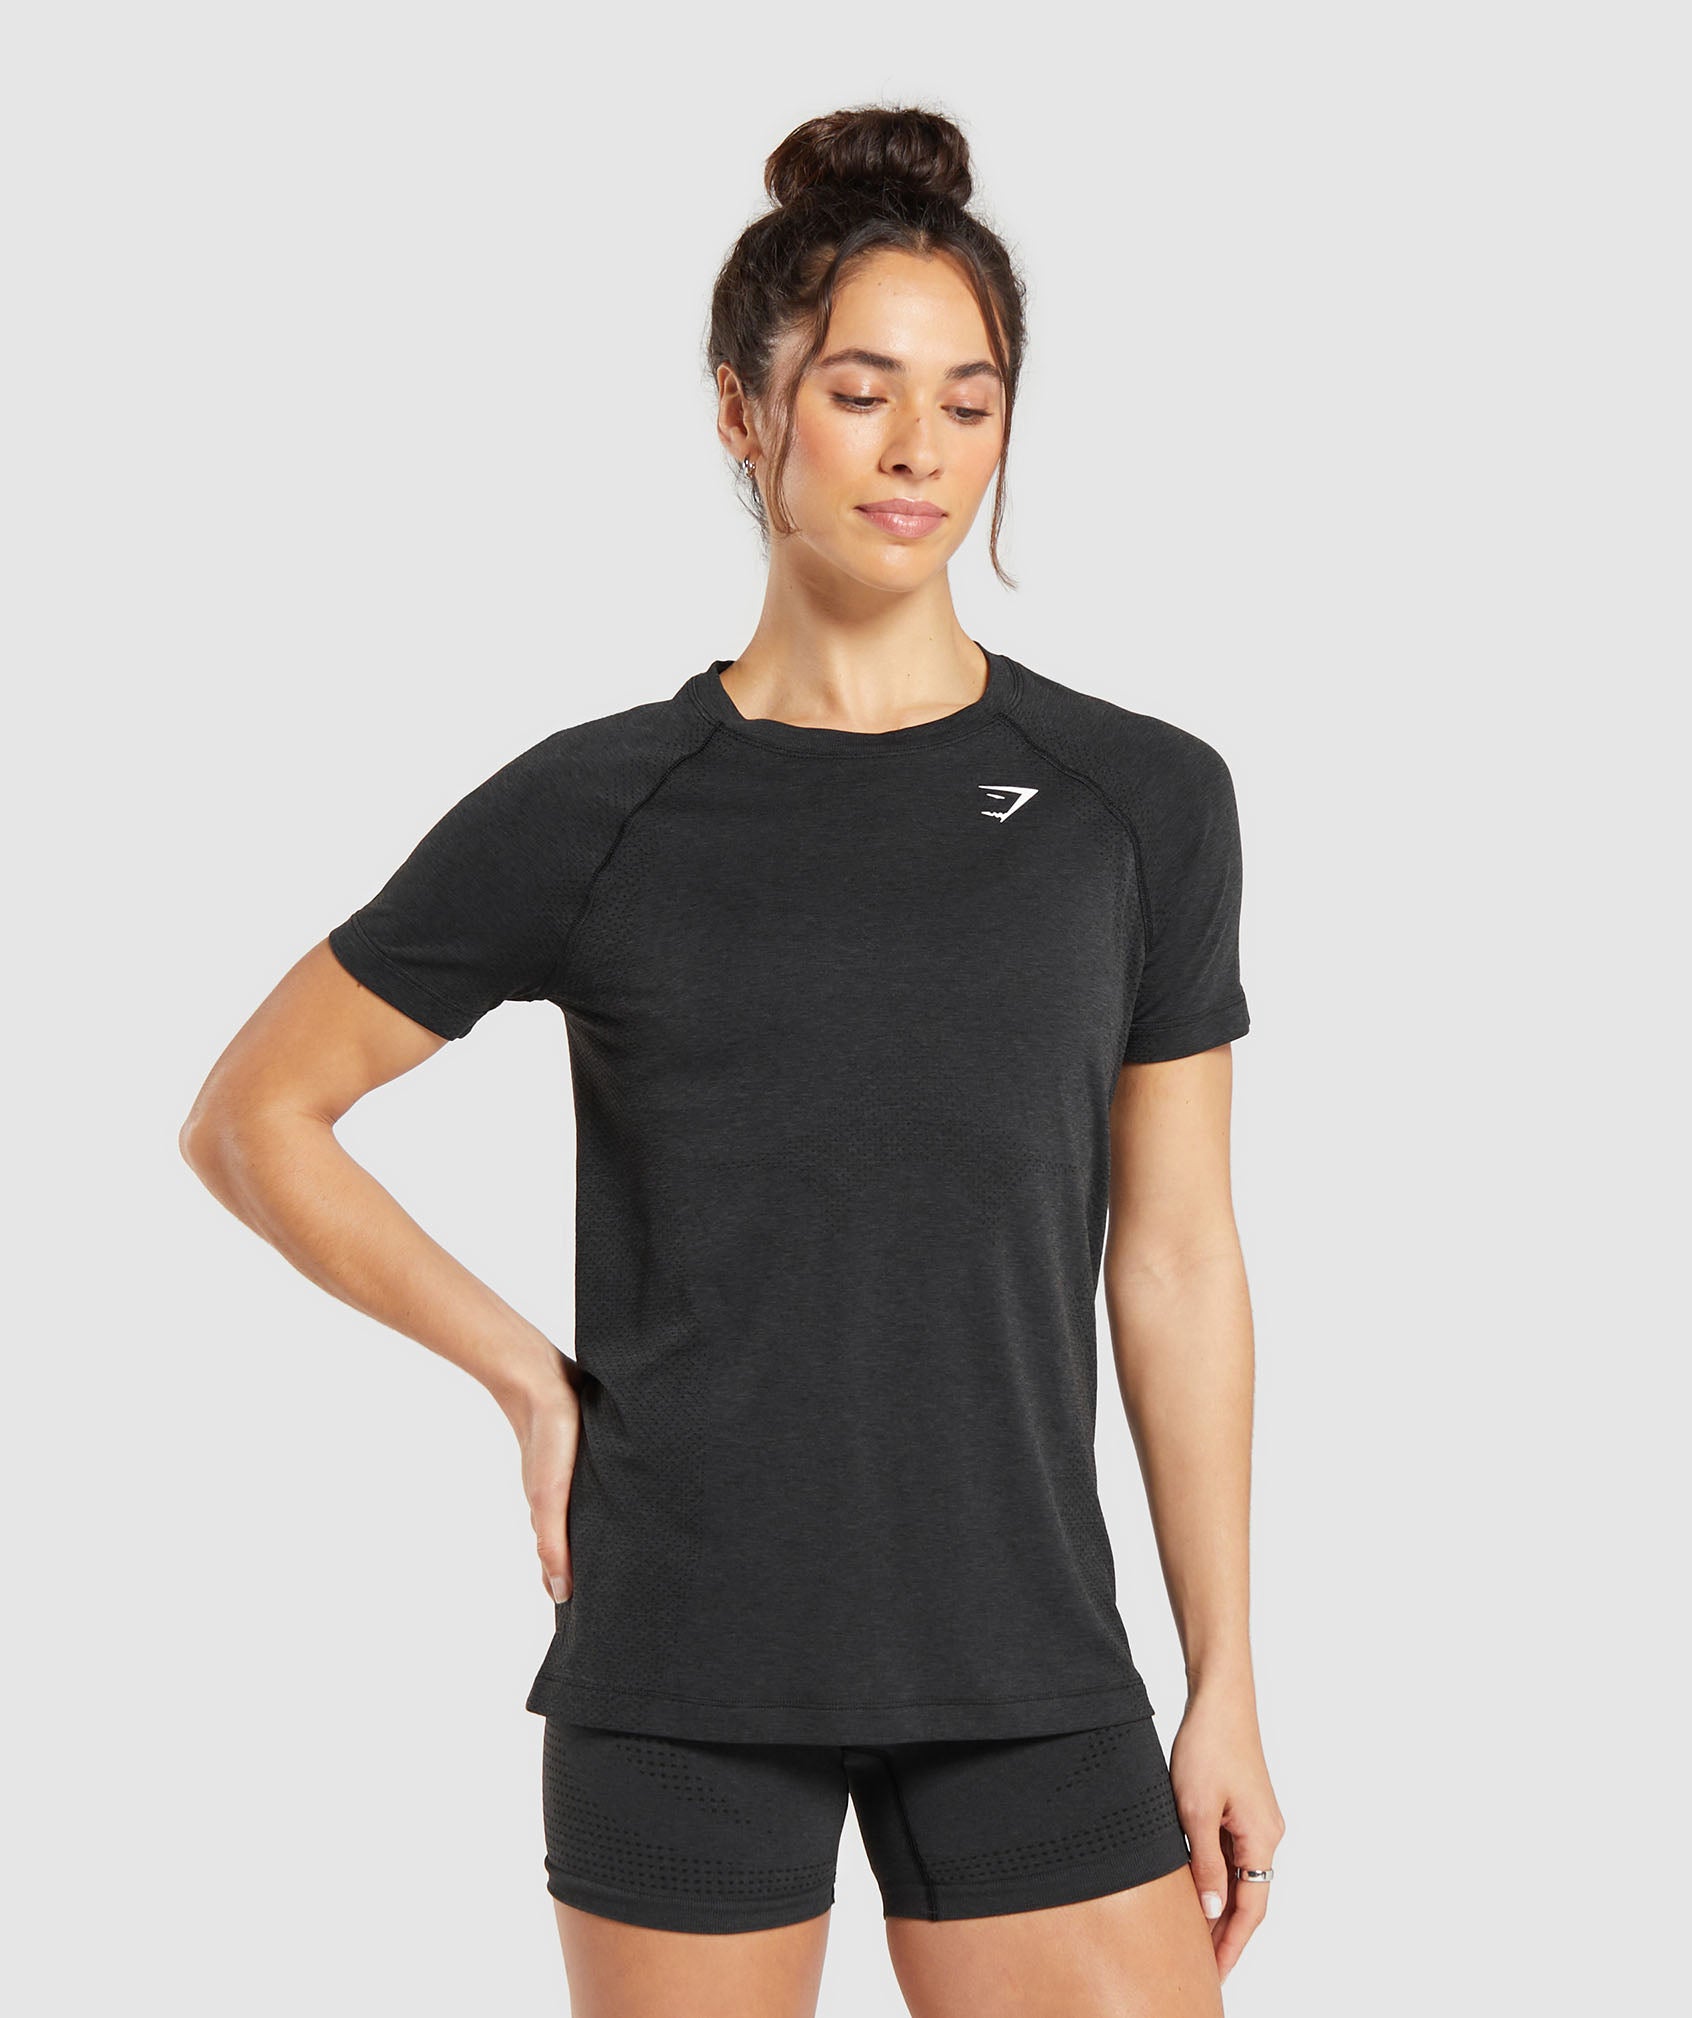 Vital Seamless 2.0 Light T-Shirt in {{variantColor} is out of stock